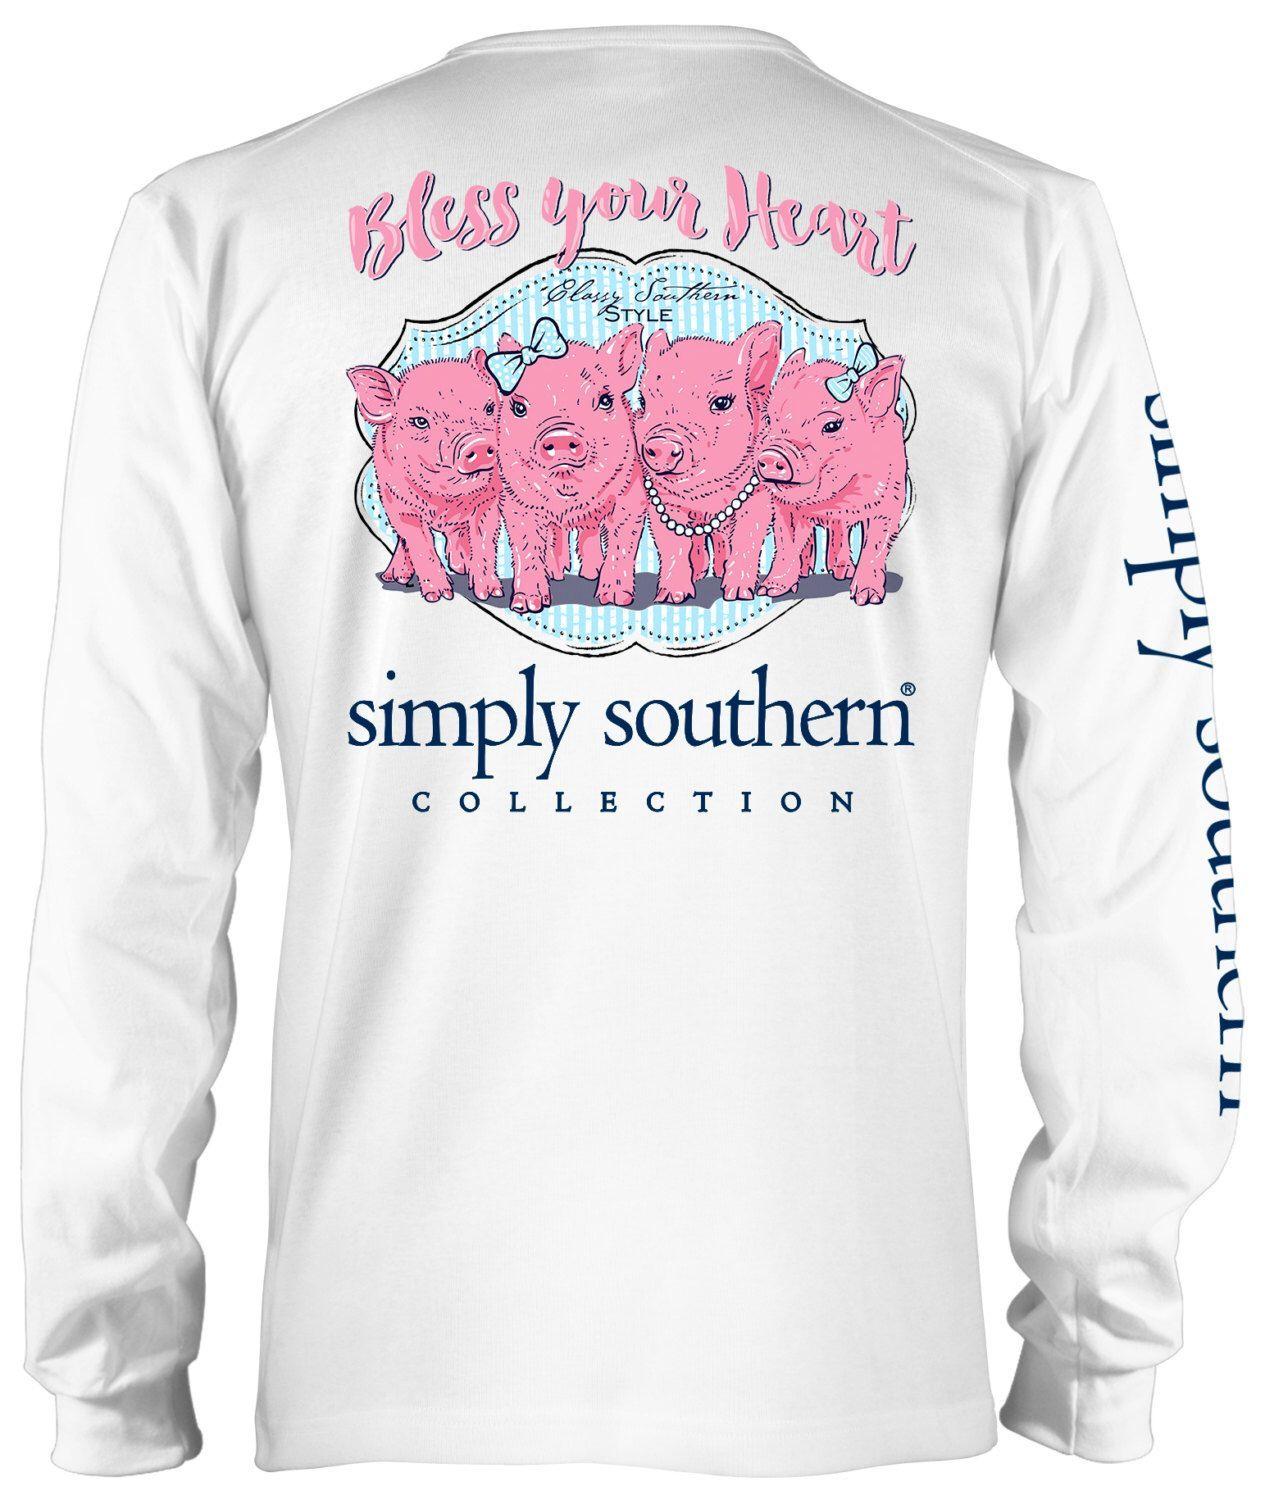 Simply Southern Company Logo - BLESS YOUR HEART Adult Sizes $14.00 | Simply Southern Shirts ...